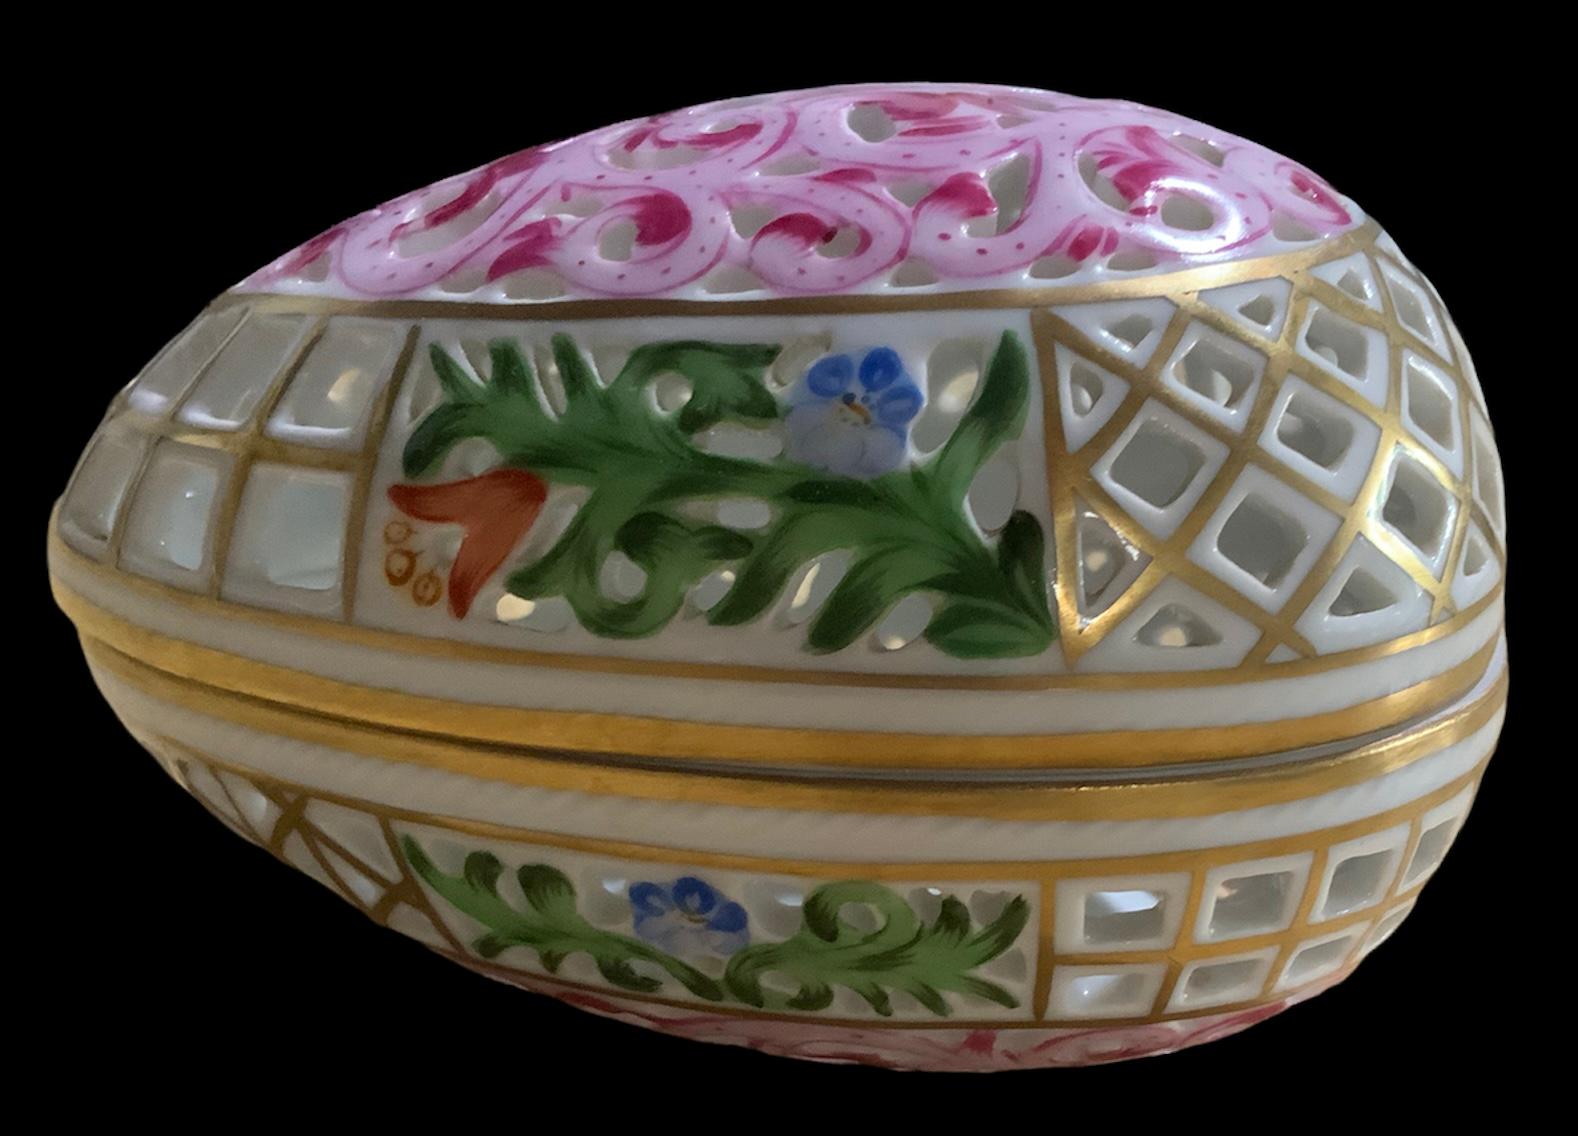 Hungarian Herend Porcelain Reticulated Potpourri / Bombonniere Lidded Egg Shaped Box